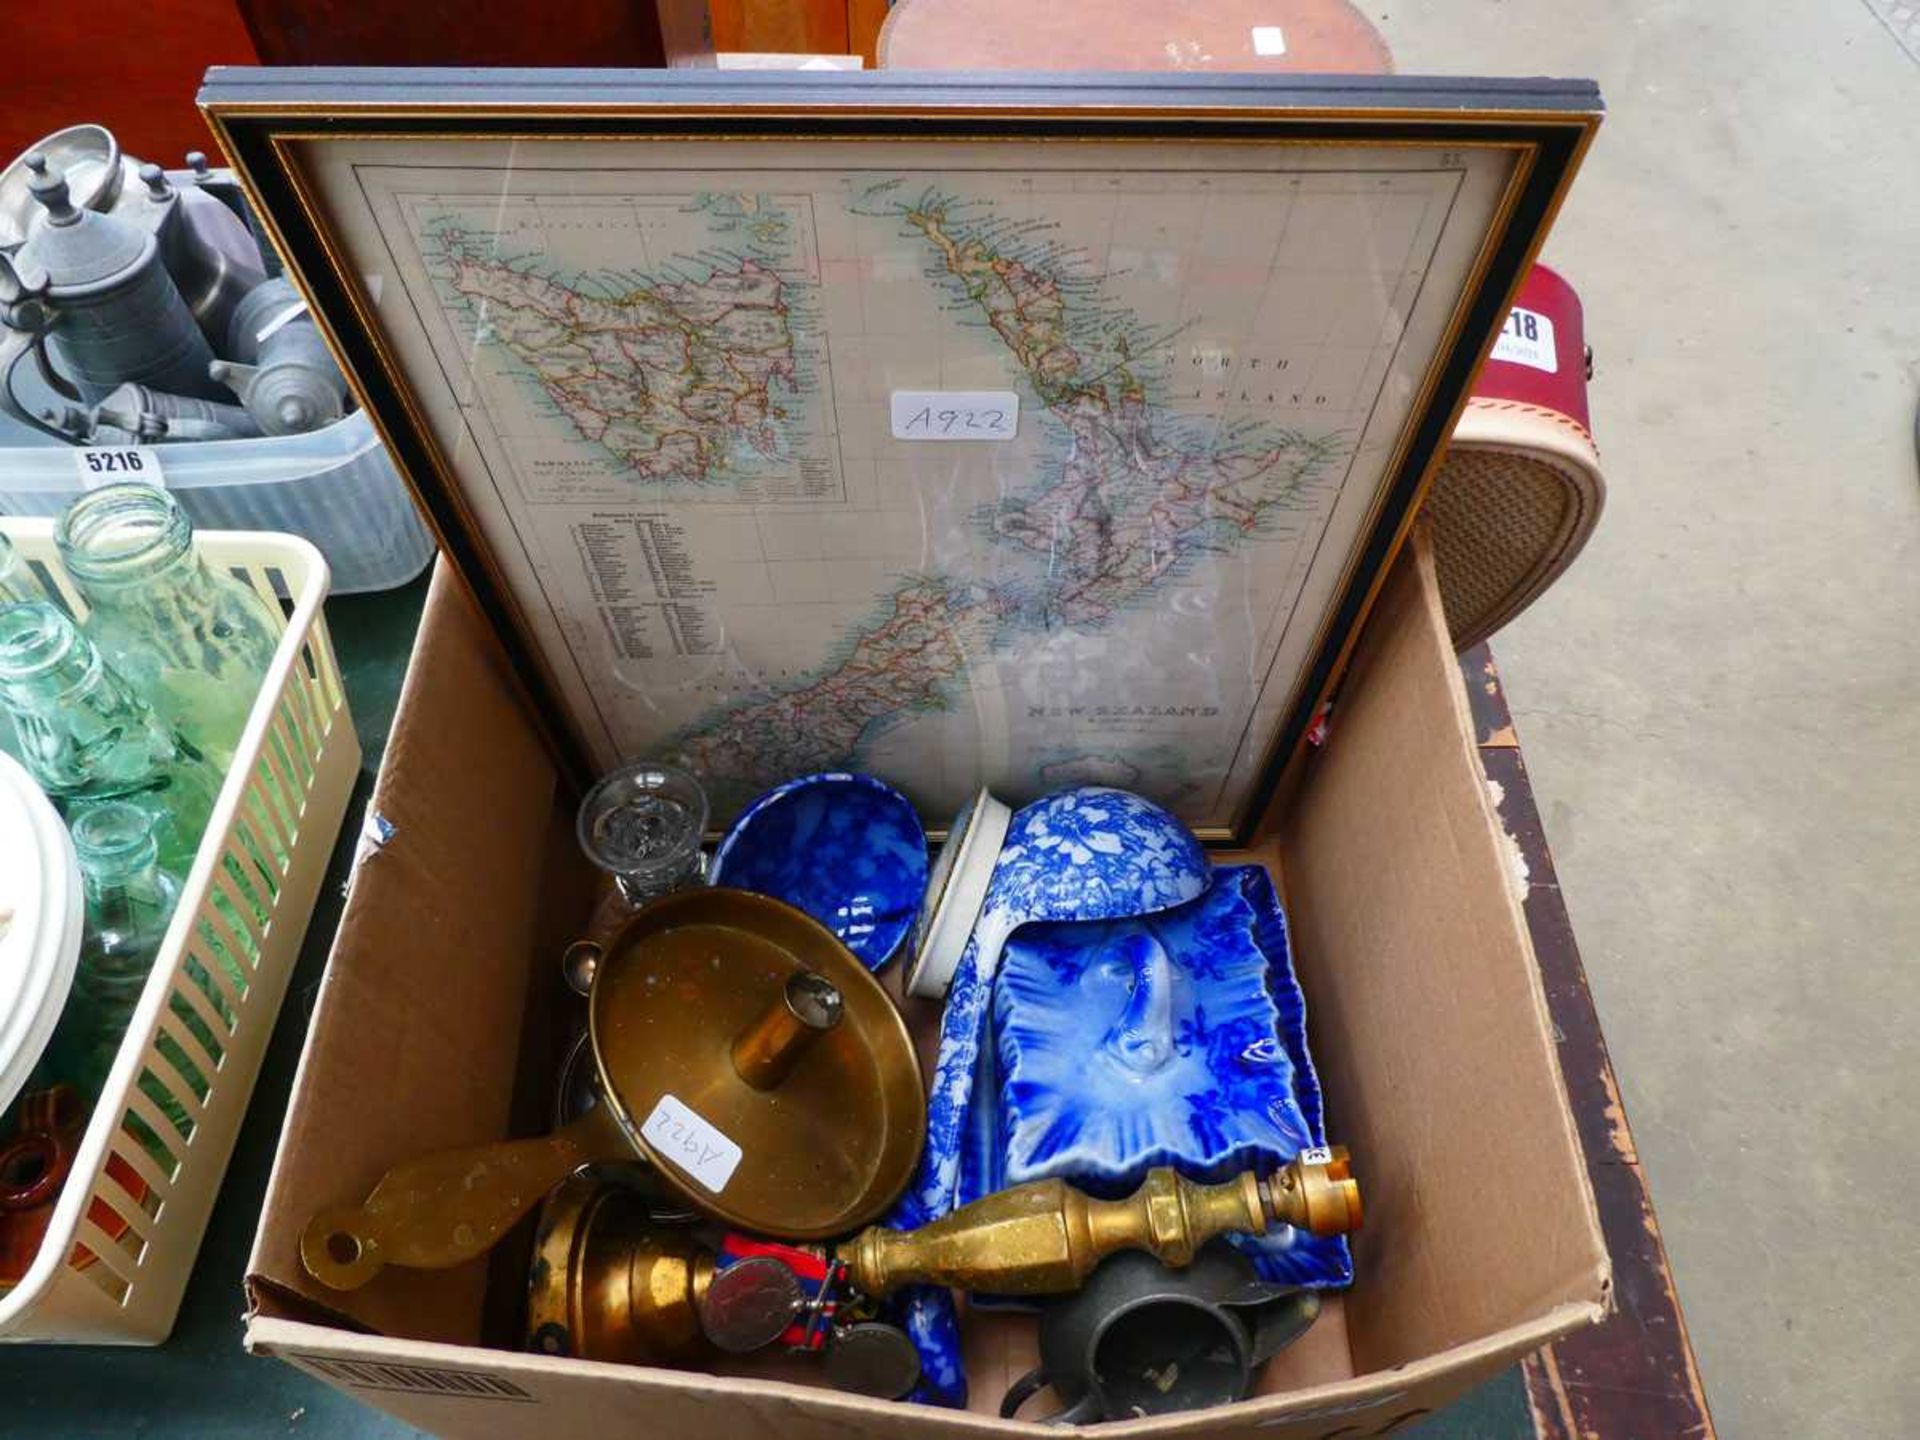 Box containing a map of New Zealand, military medals, brass candlestick, table lamp, blue and